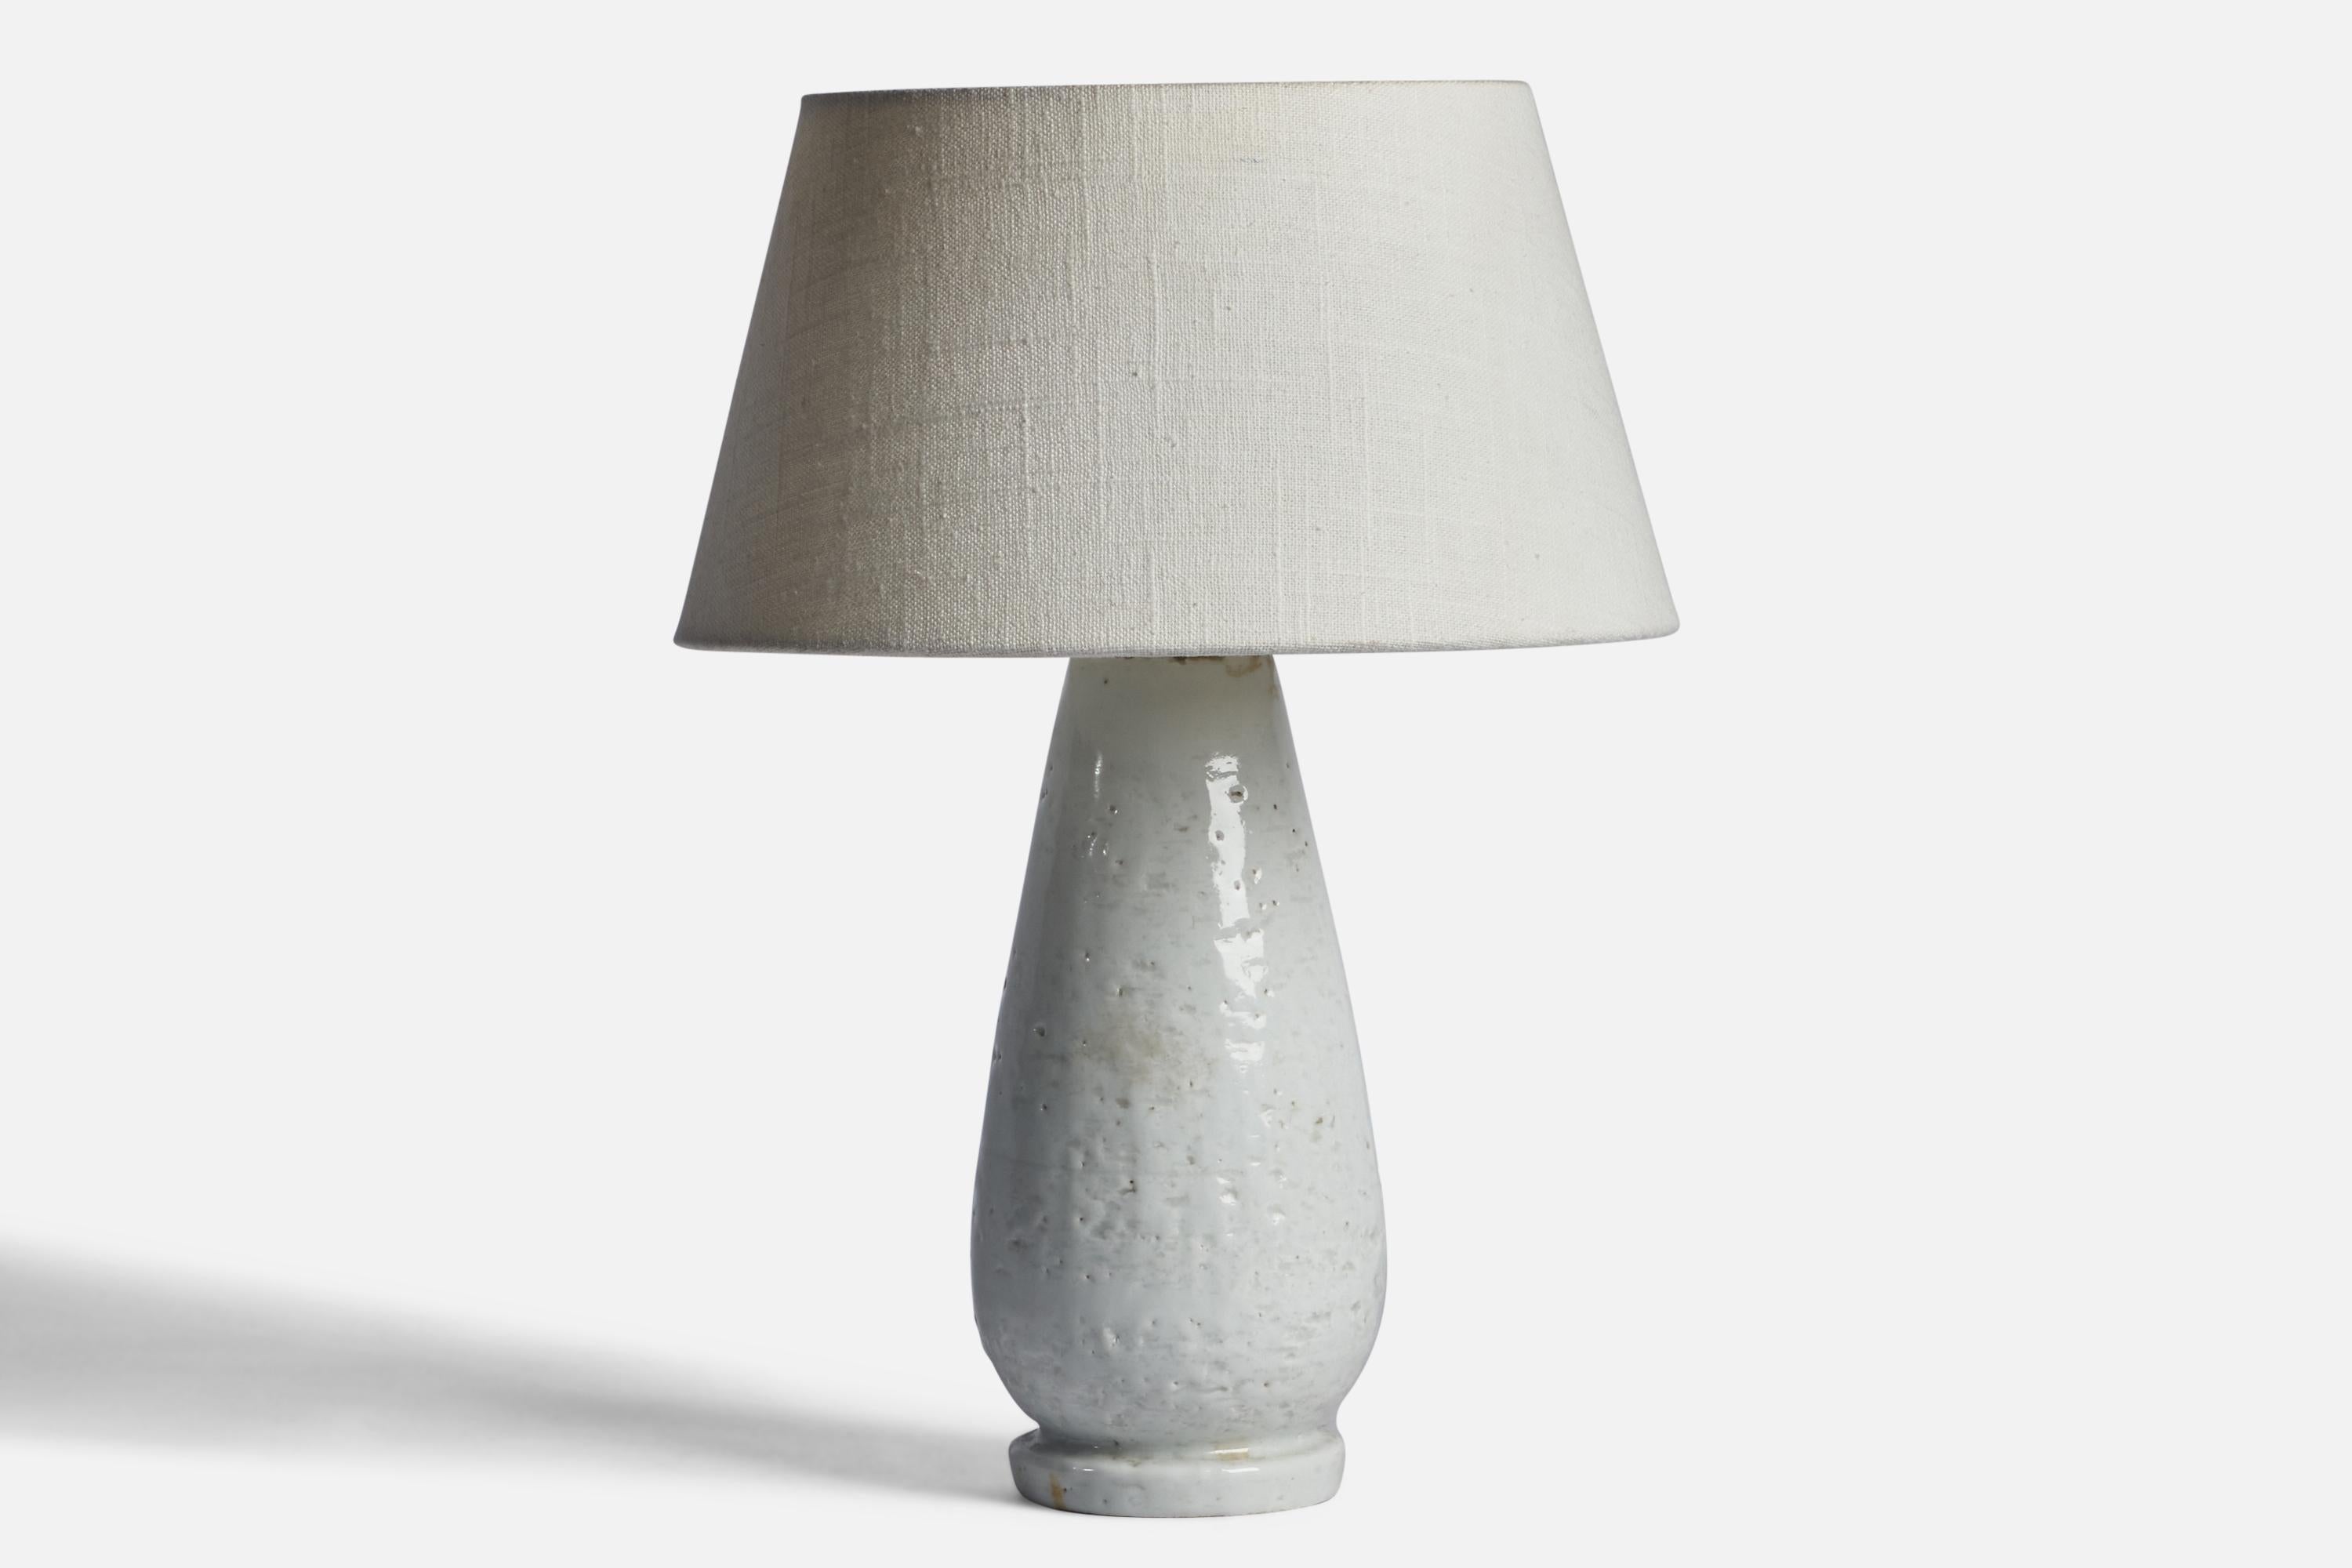 An off-white glazed stoneware table lamp designed by Gunnar Nylund and produced by Rörstrand, Sweden, 1940s.

Dimensions of Lamp (inches): 11.2” H x 4.25” Diameter
Dimensions of Shade (inches): 7” Top Diameter x 10” Bottom Diameter x 5.5” H